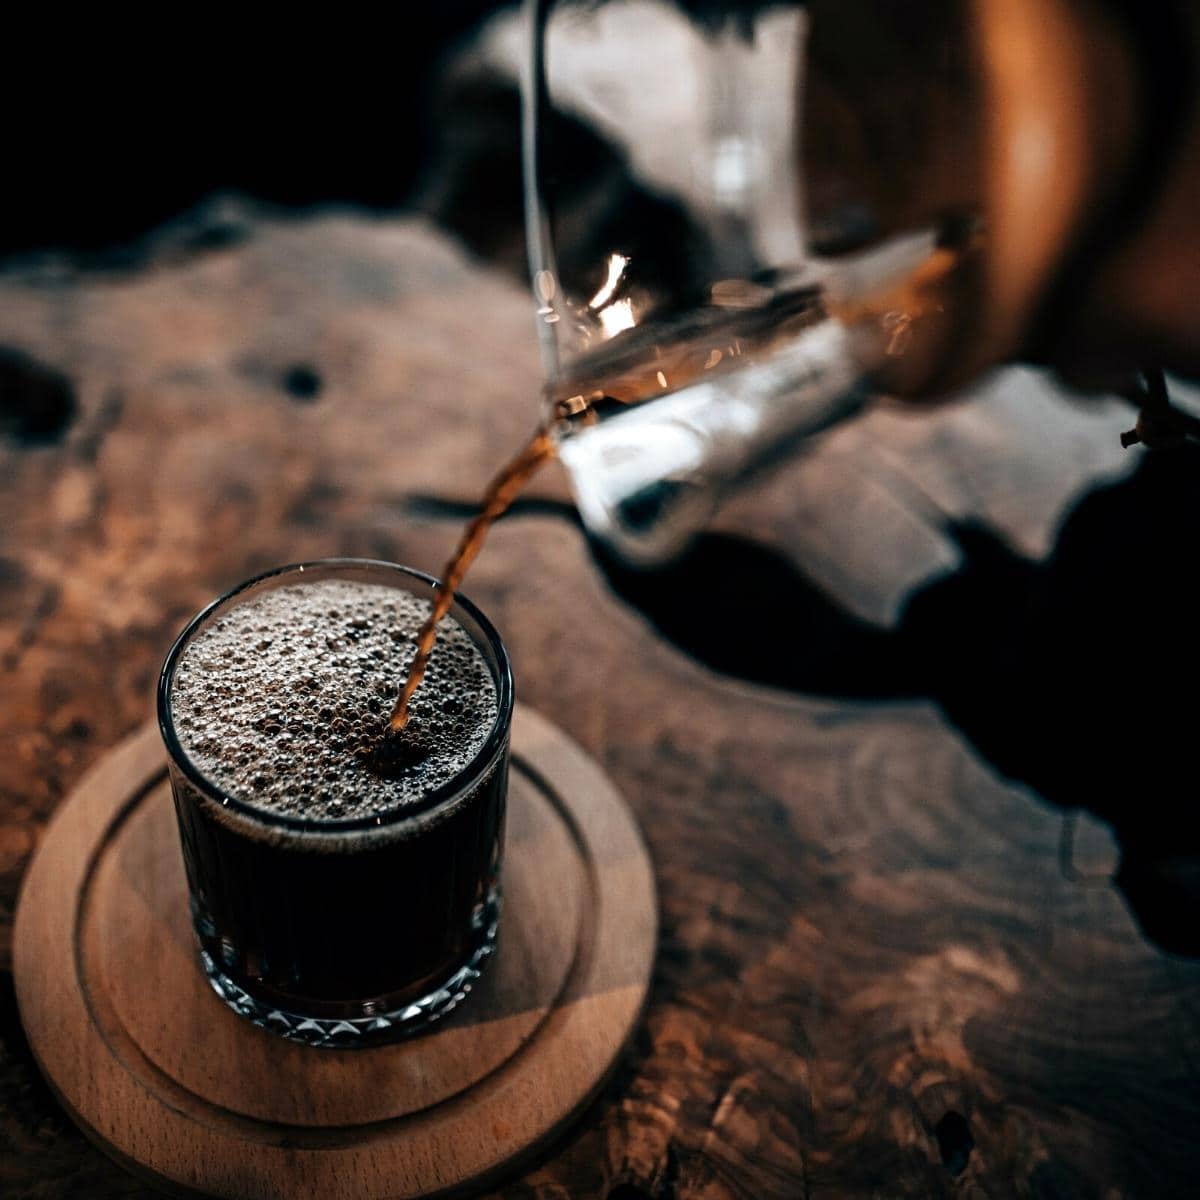 Dark coffee being poured into a clear glass.